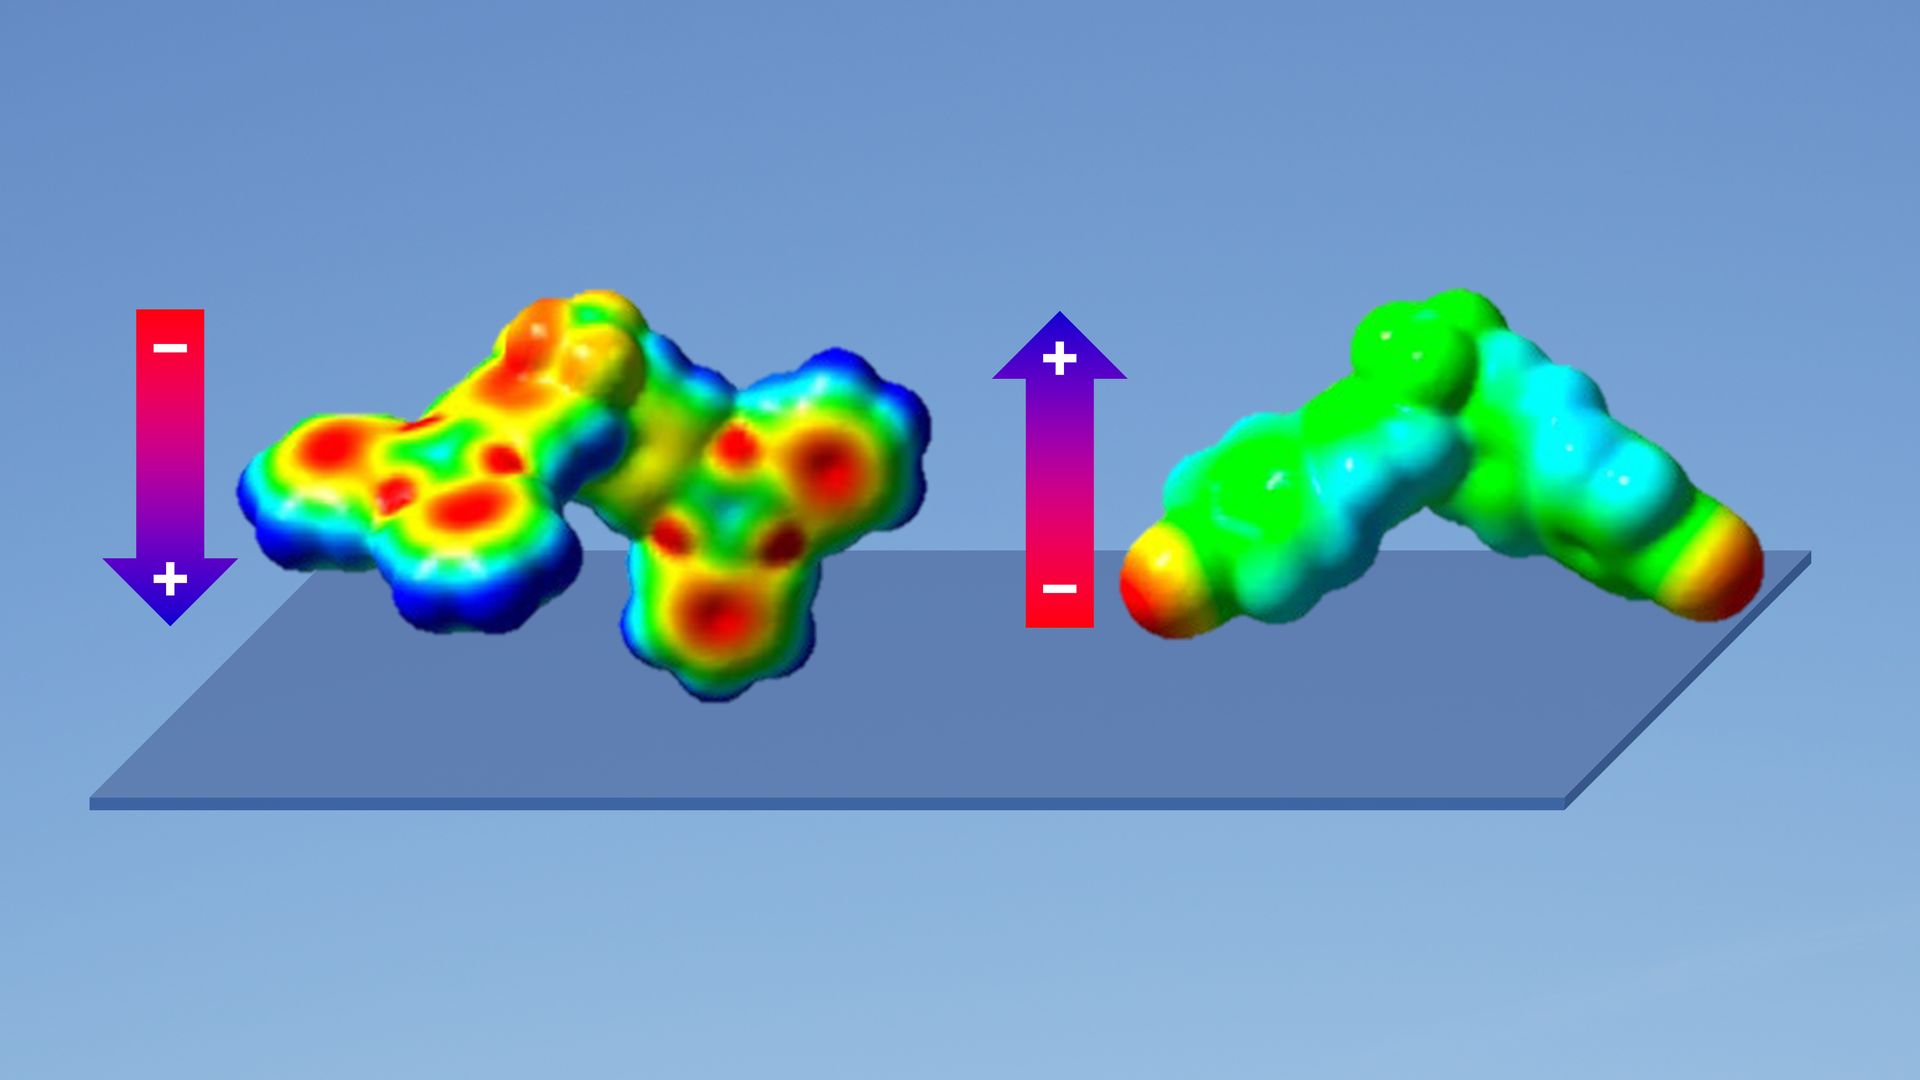 Two molecules that form giant surface potentials in different directions when deposited on a surface